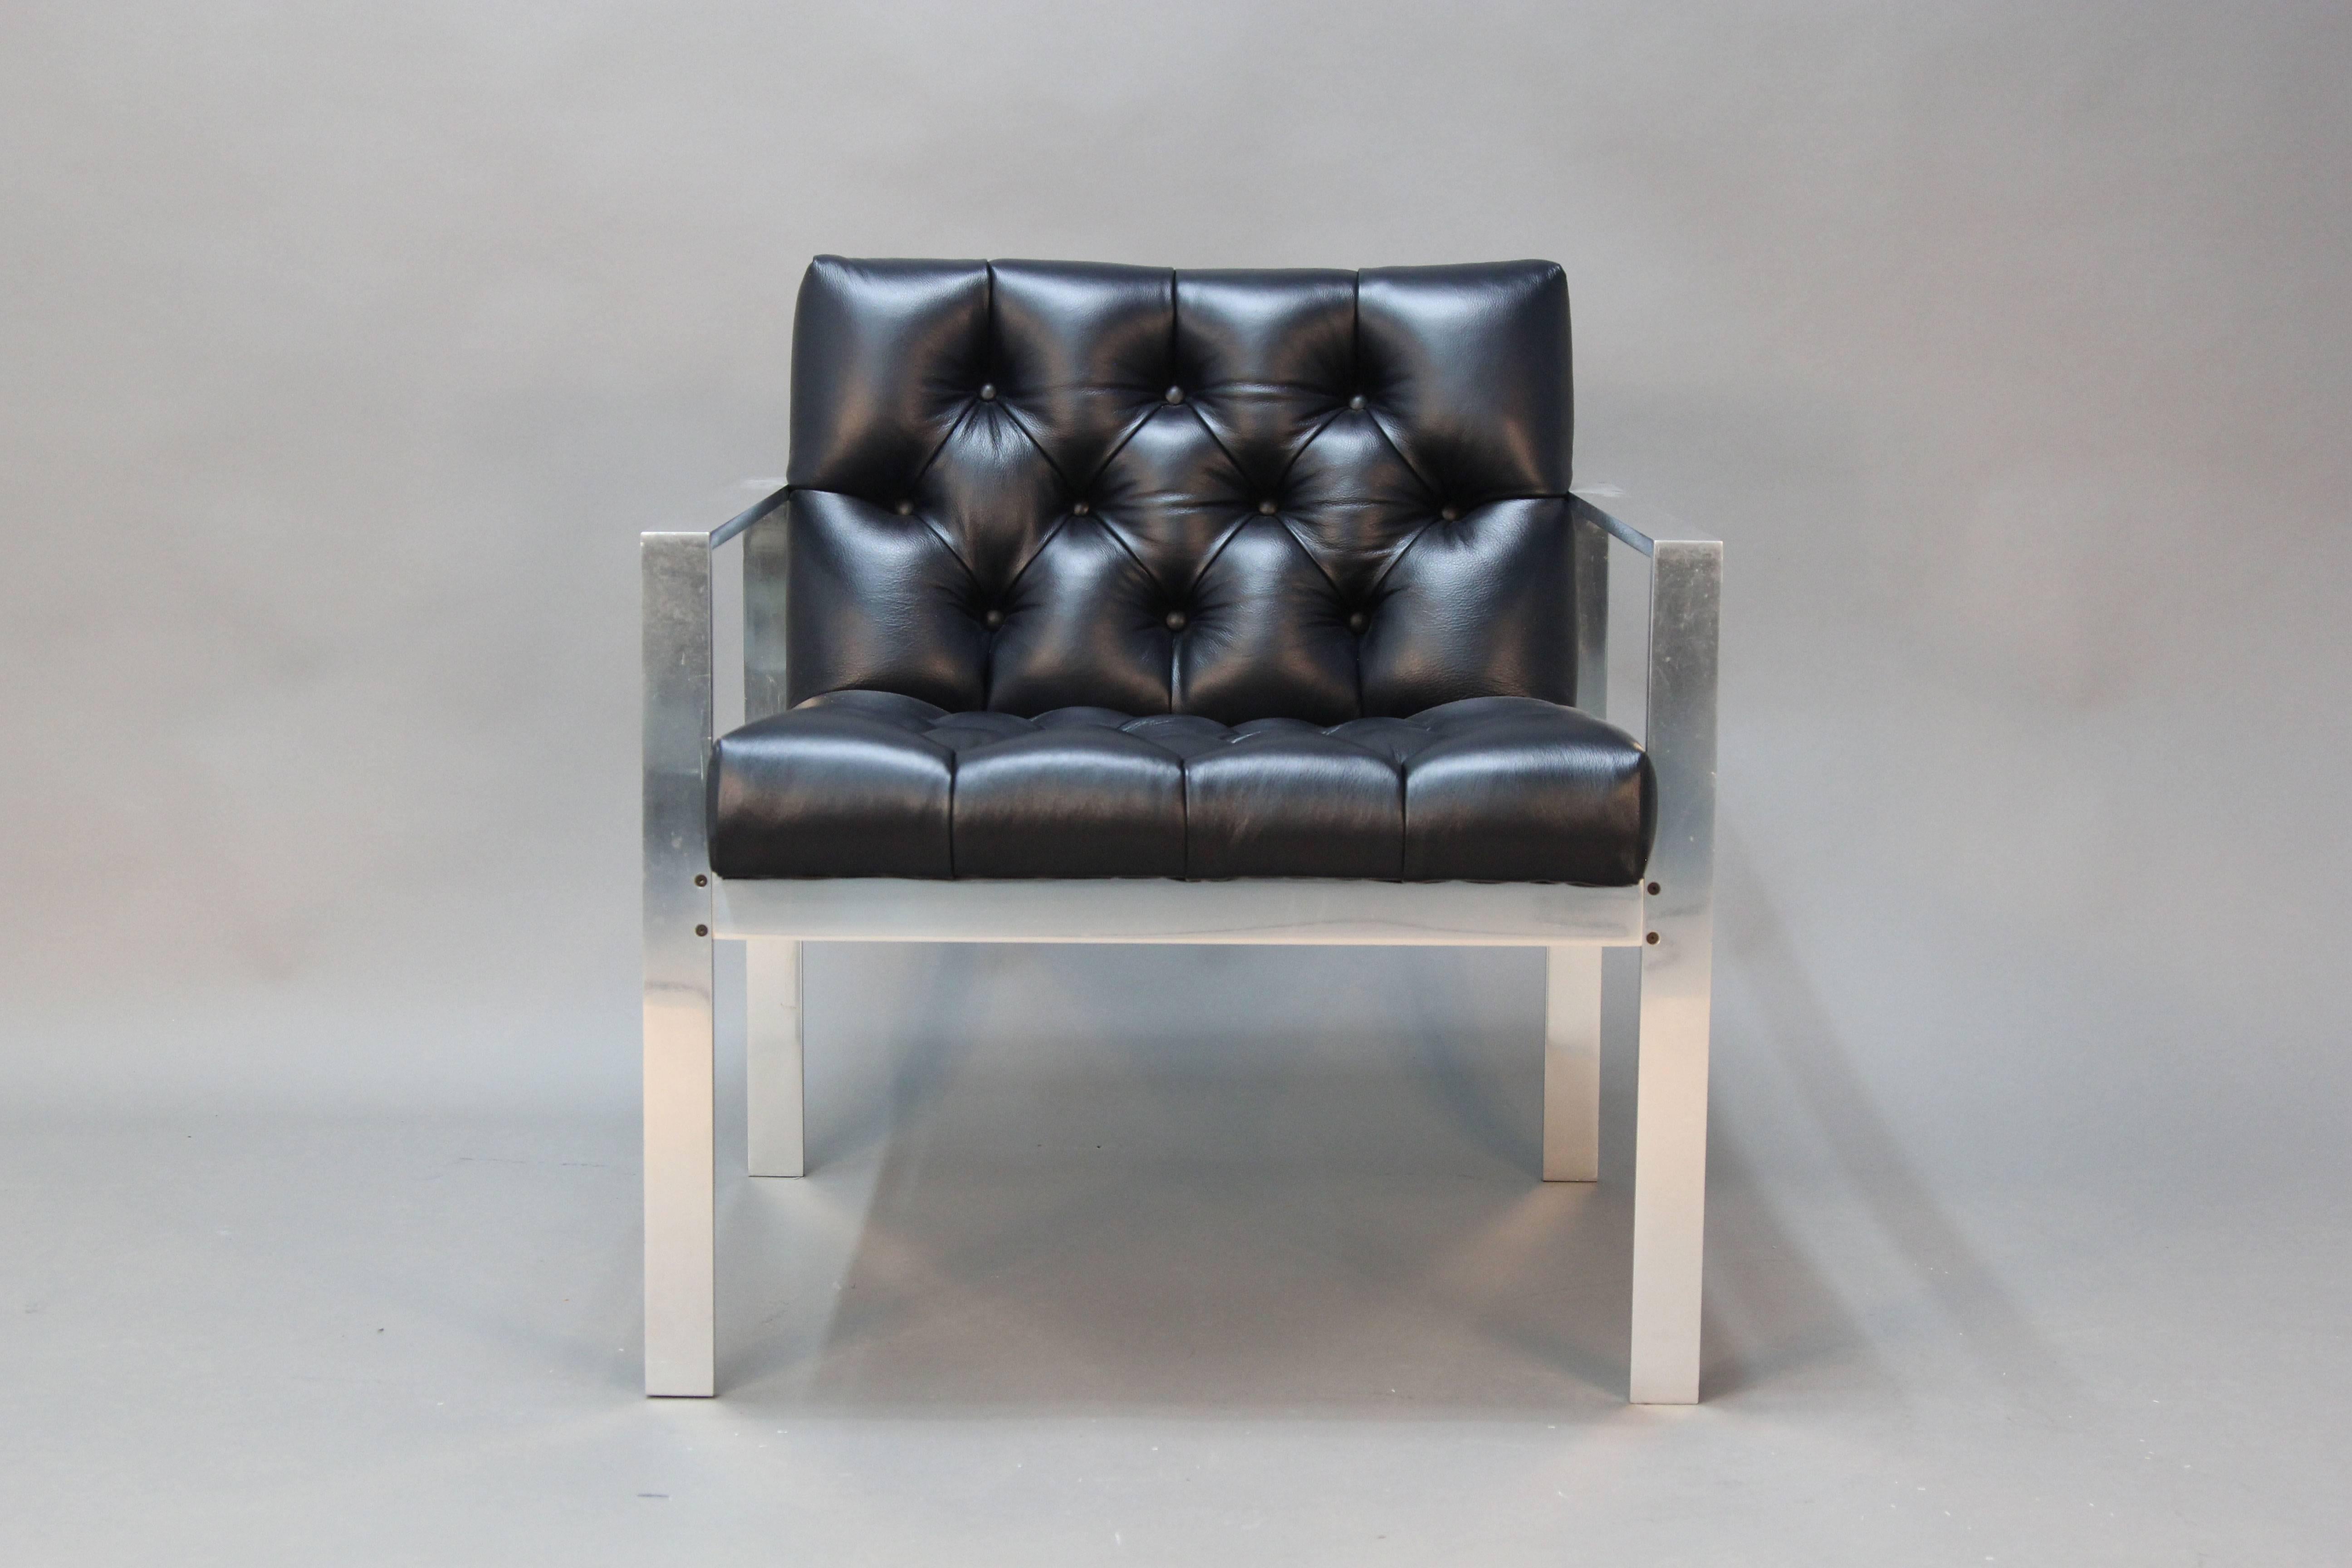 Incredible newly upholstered lush button tufted leather back and seat. Square brushed chrome frame. Beautiful chair, great for desk chair, lounge chair, or occasional chair. Milo Baughman style.